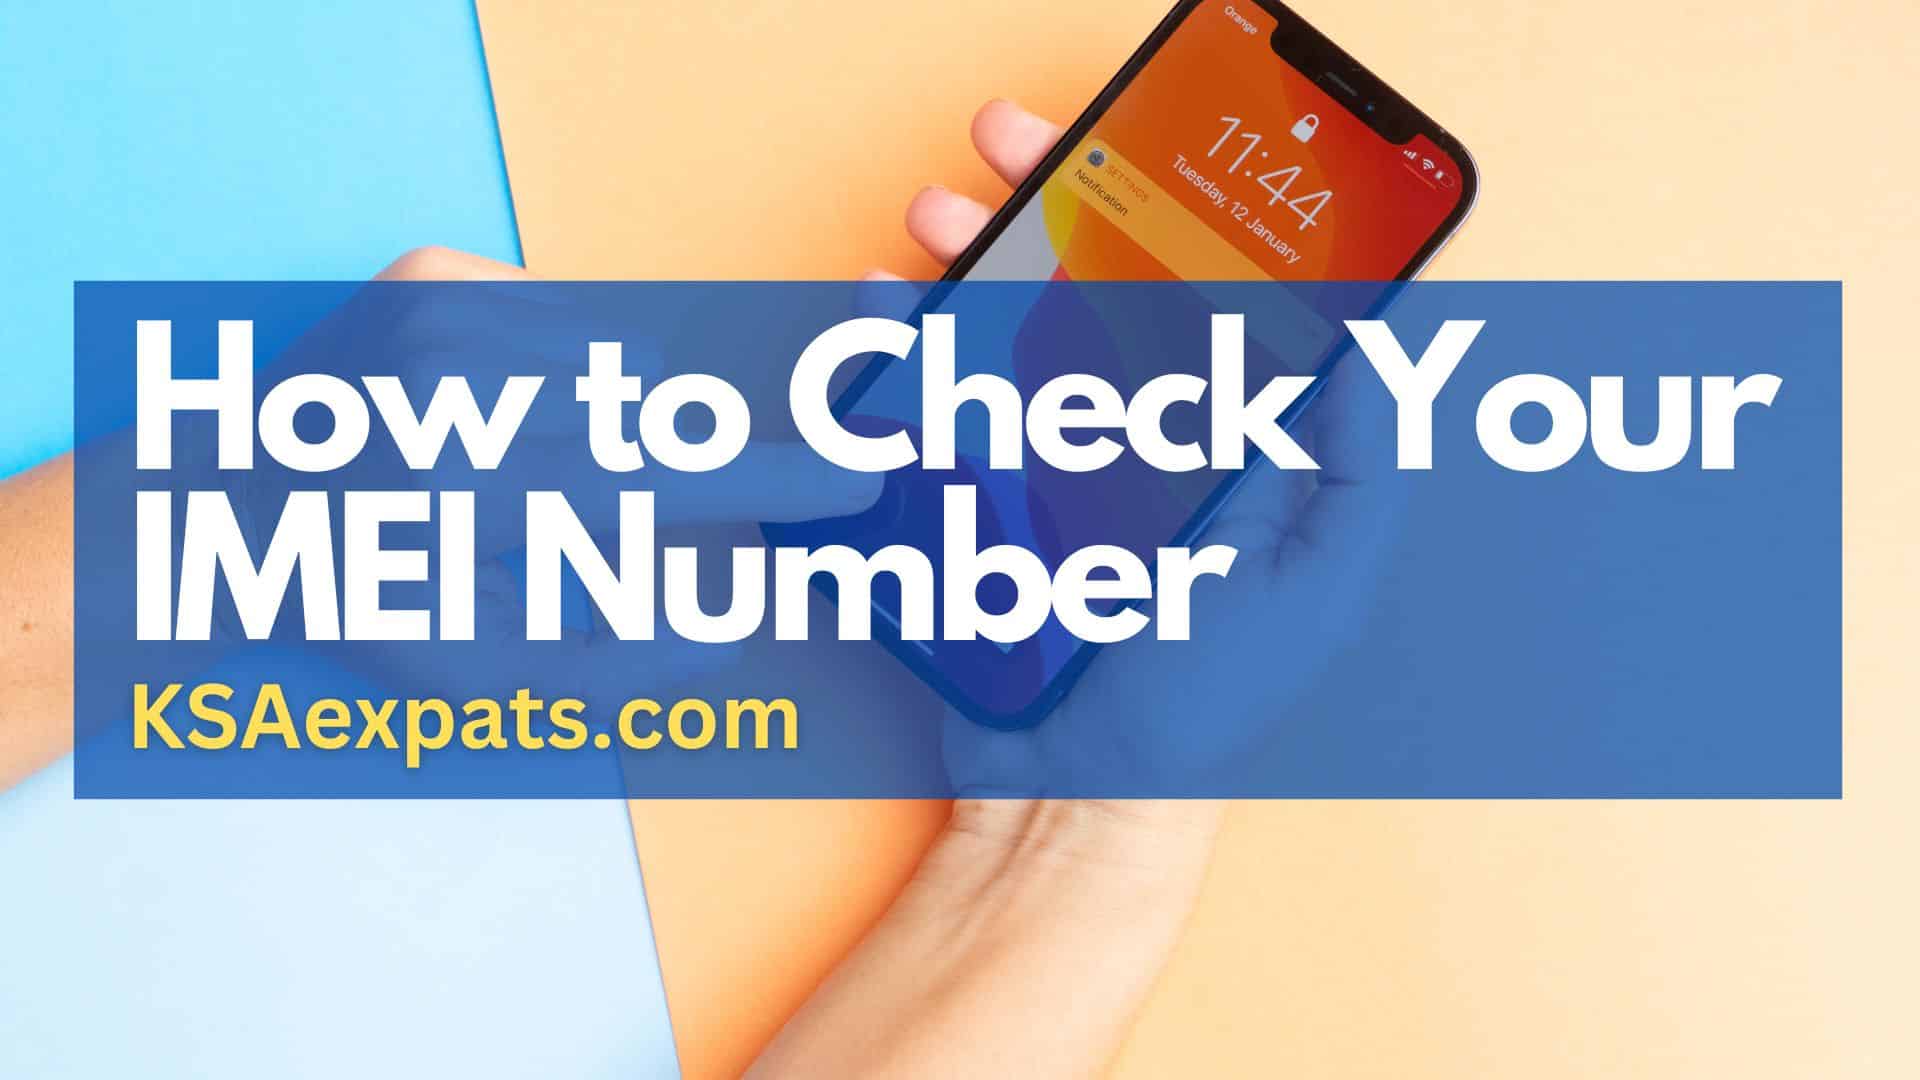 How to Check Your IMEI Number